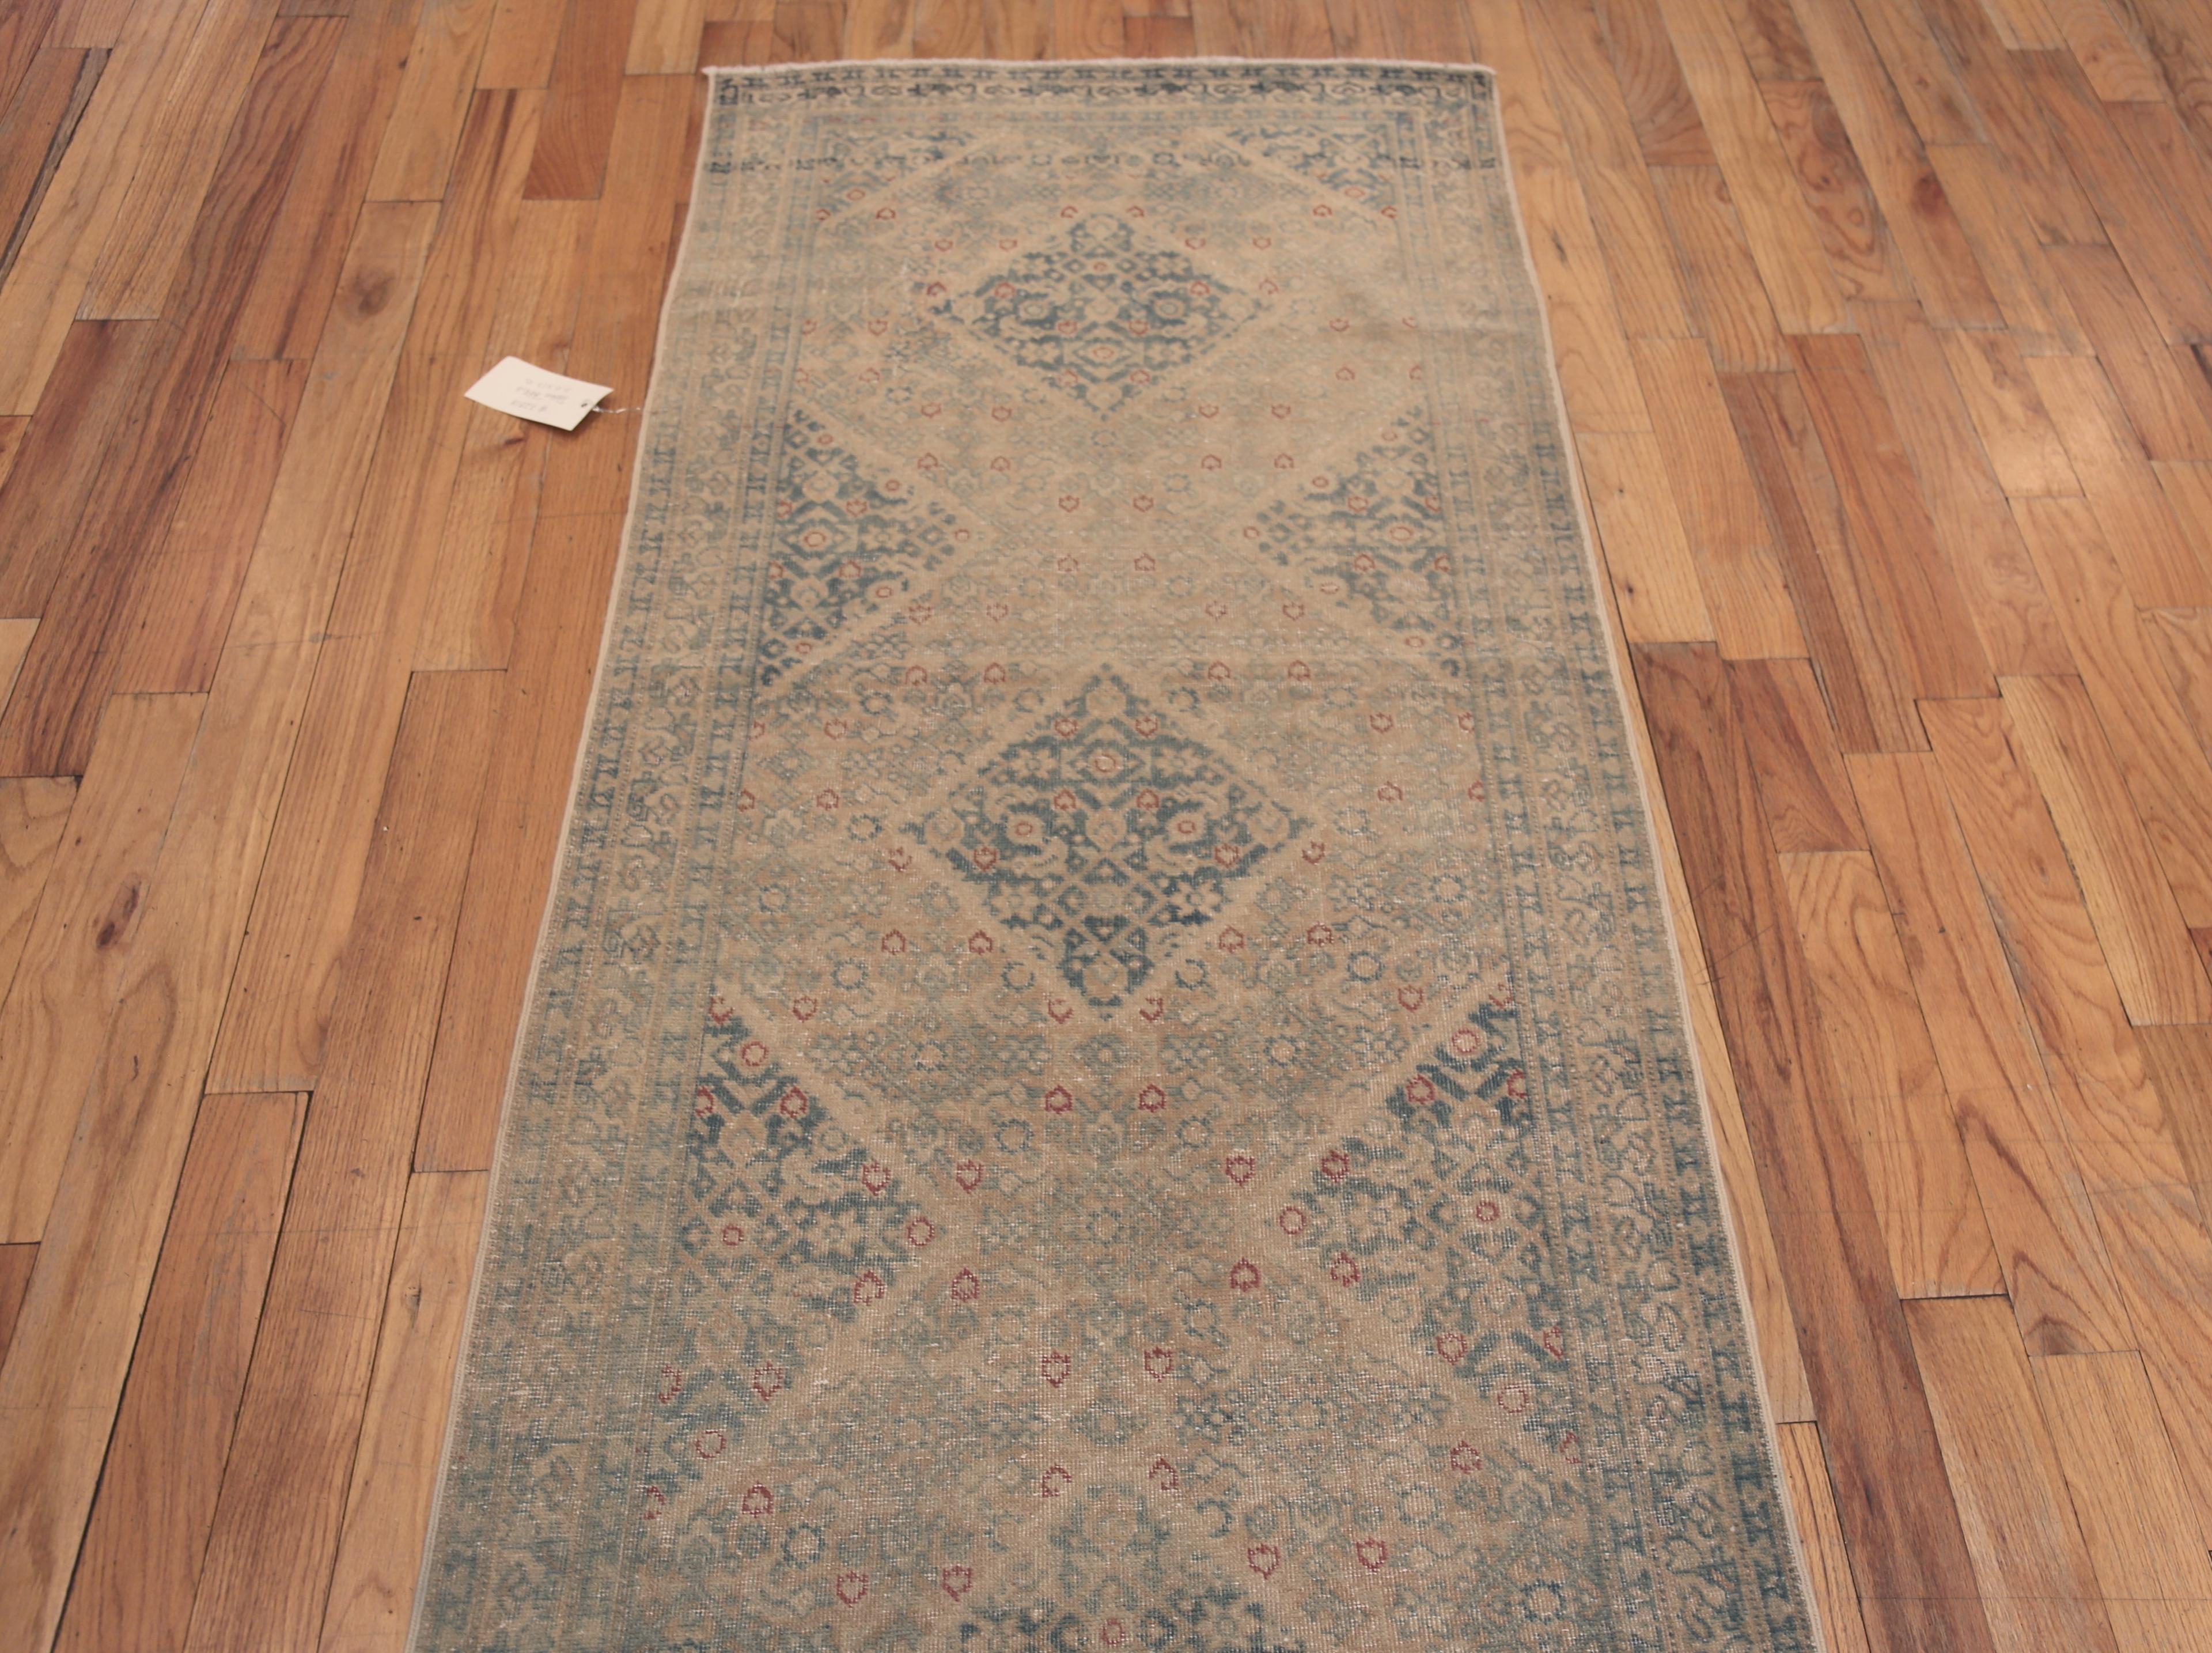 Geometric Antique Persian Tabriz Runner Rug 3' x 13' In Good Condition For Sale In New York, NY